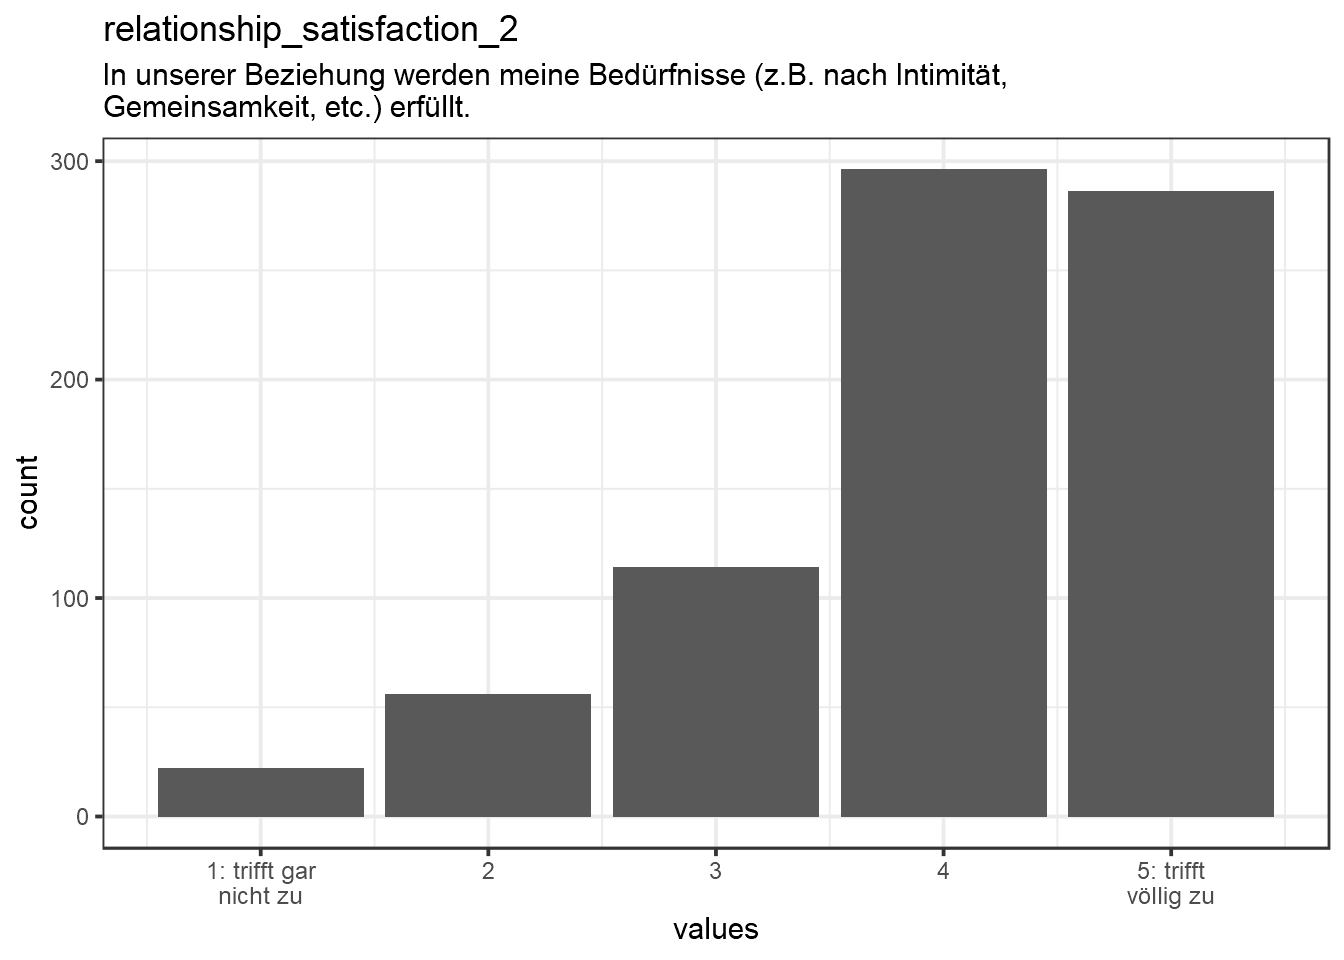 Distribution of values for relationship_satisfaction_2